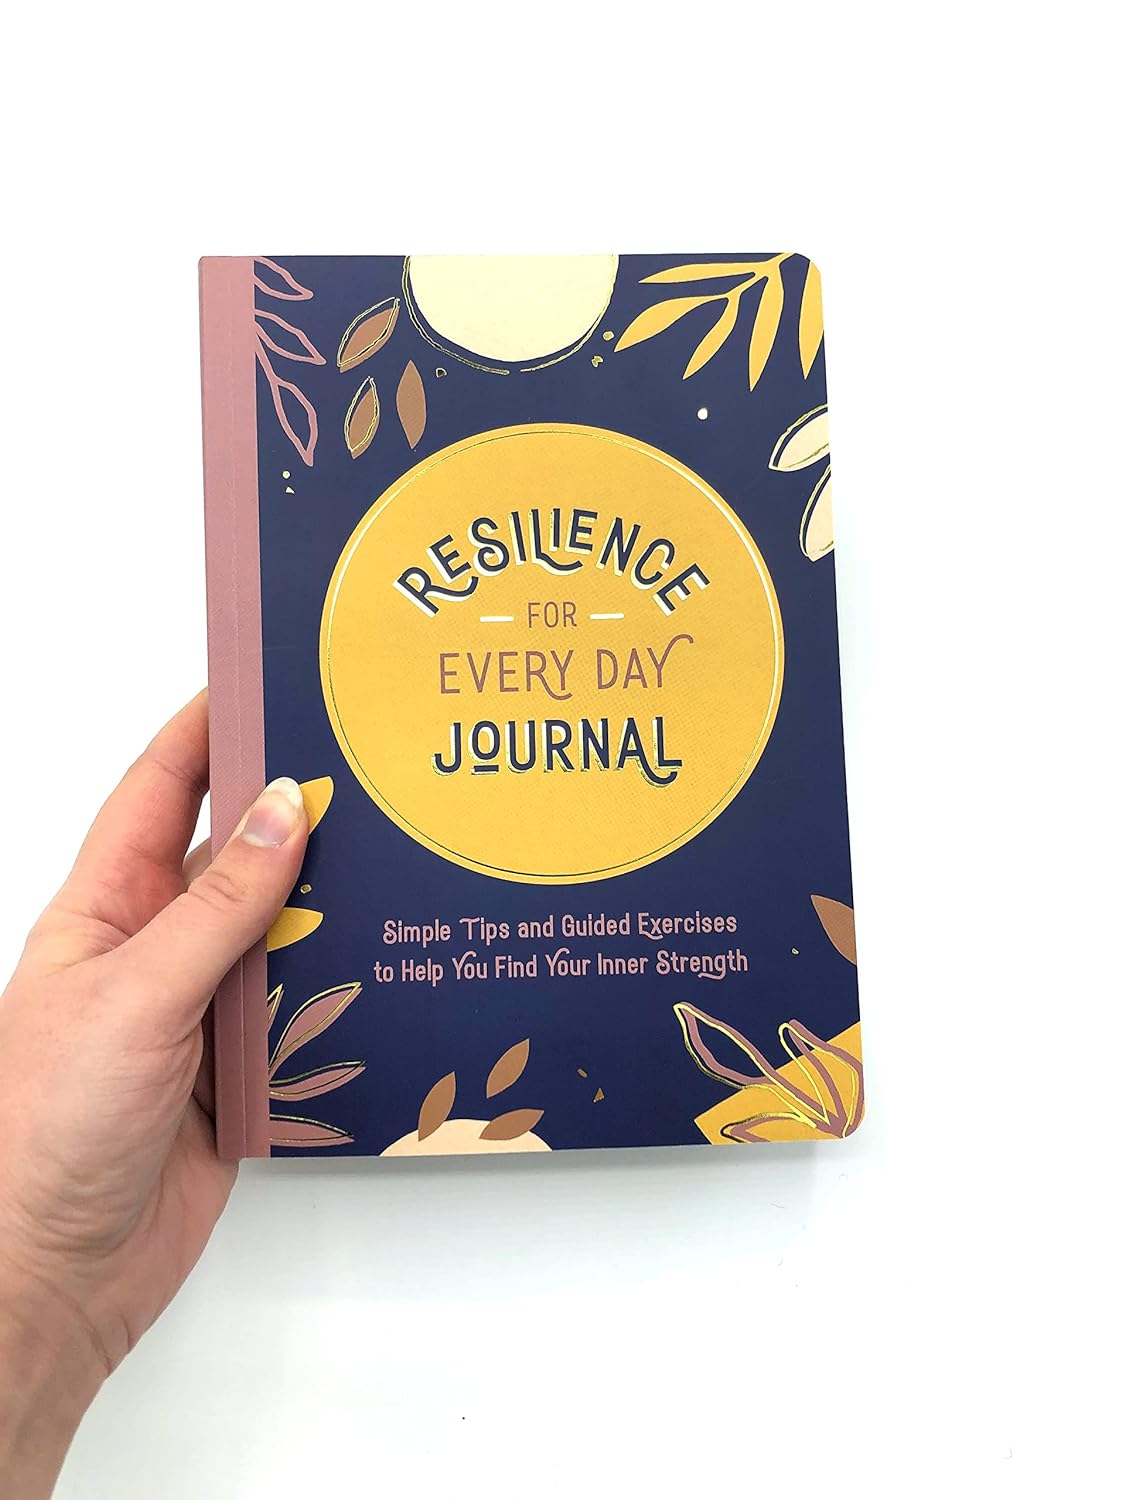 Resilience for Every Day Journal: Simple Tips and Guided Exercises to Help You Find Your Inner Strength - The English Bookshop